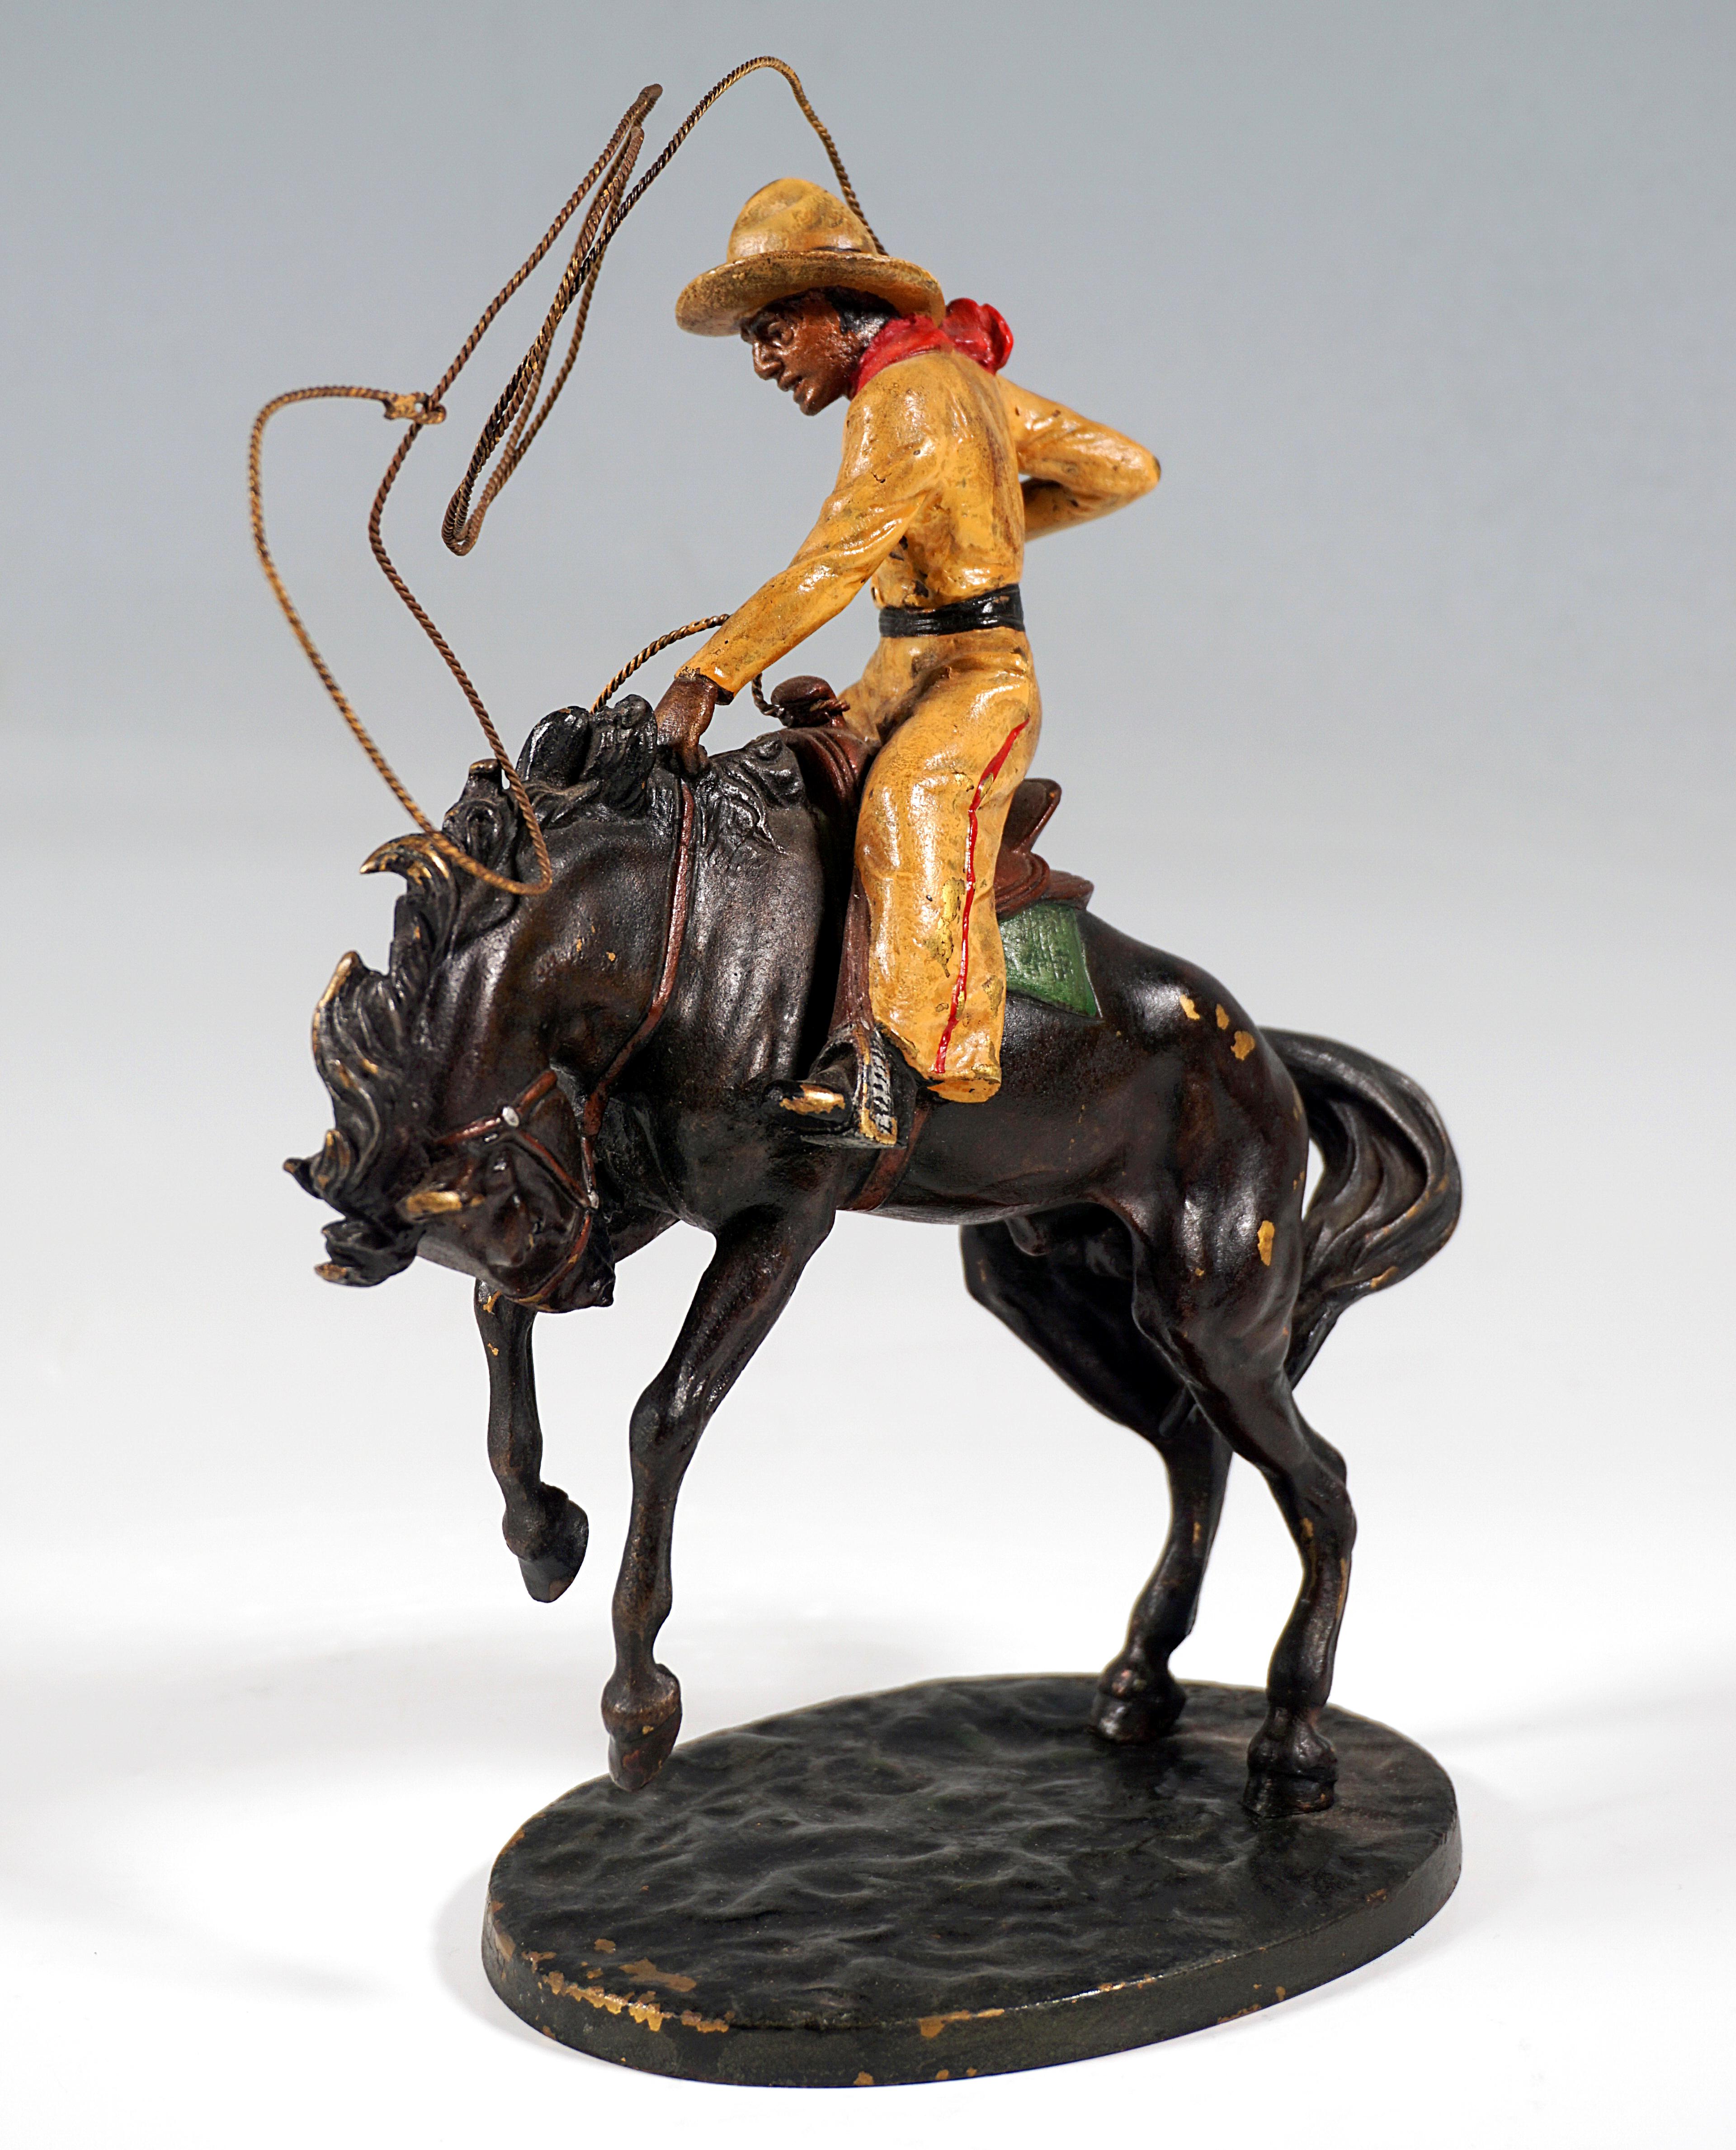 Austrian Cowboy with Lasso on Horse, Viennese Bronze Figure by Carl Kauba, Around 1920 For Sale